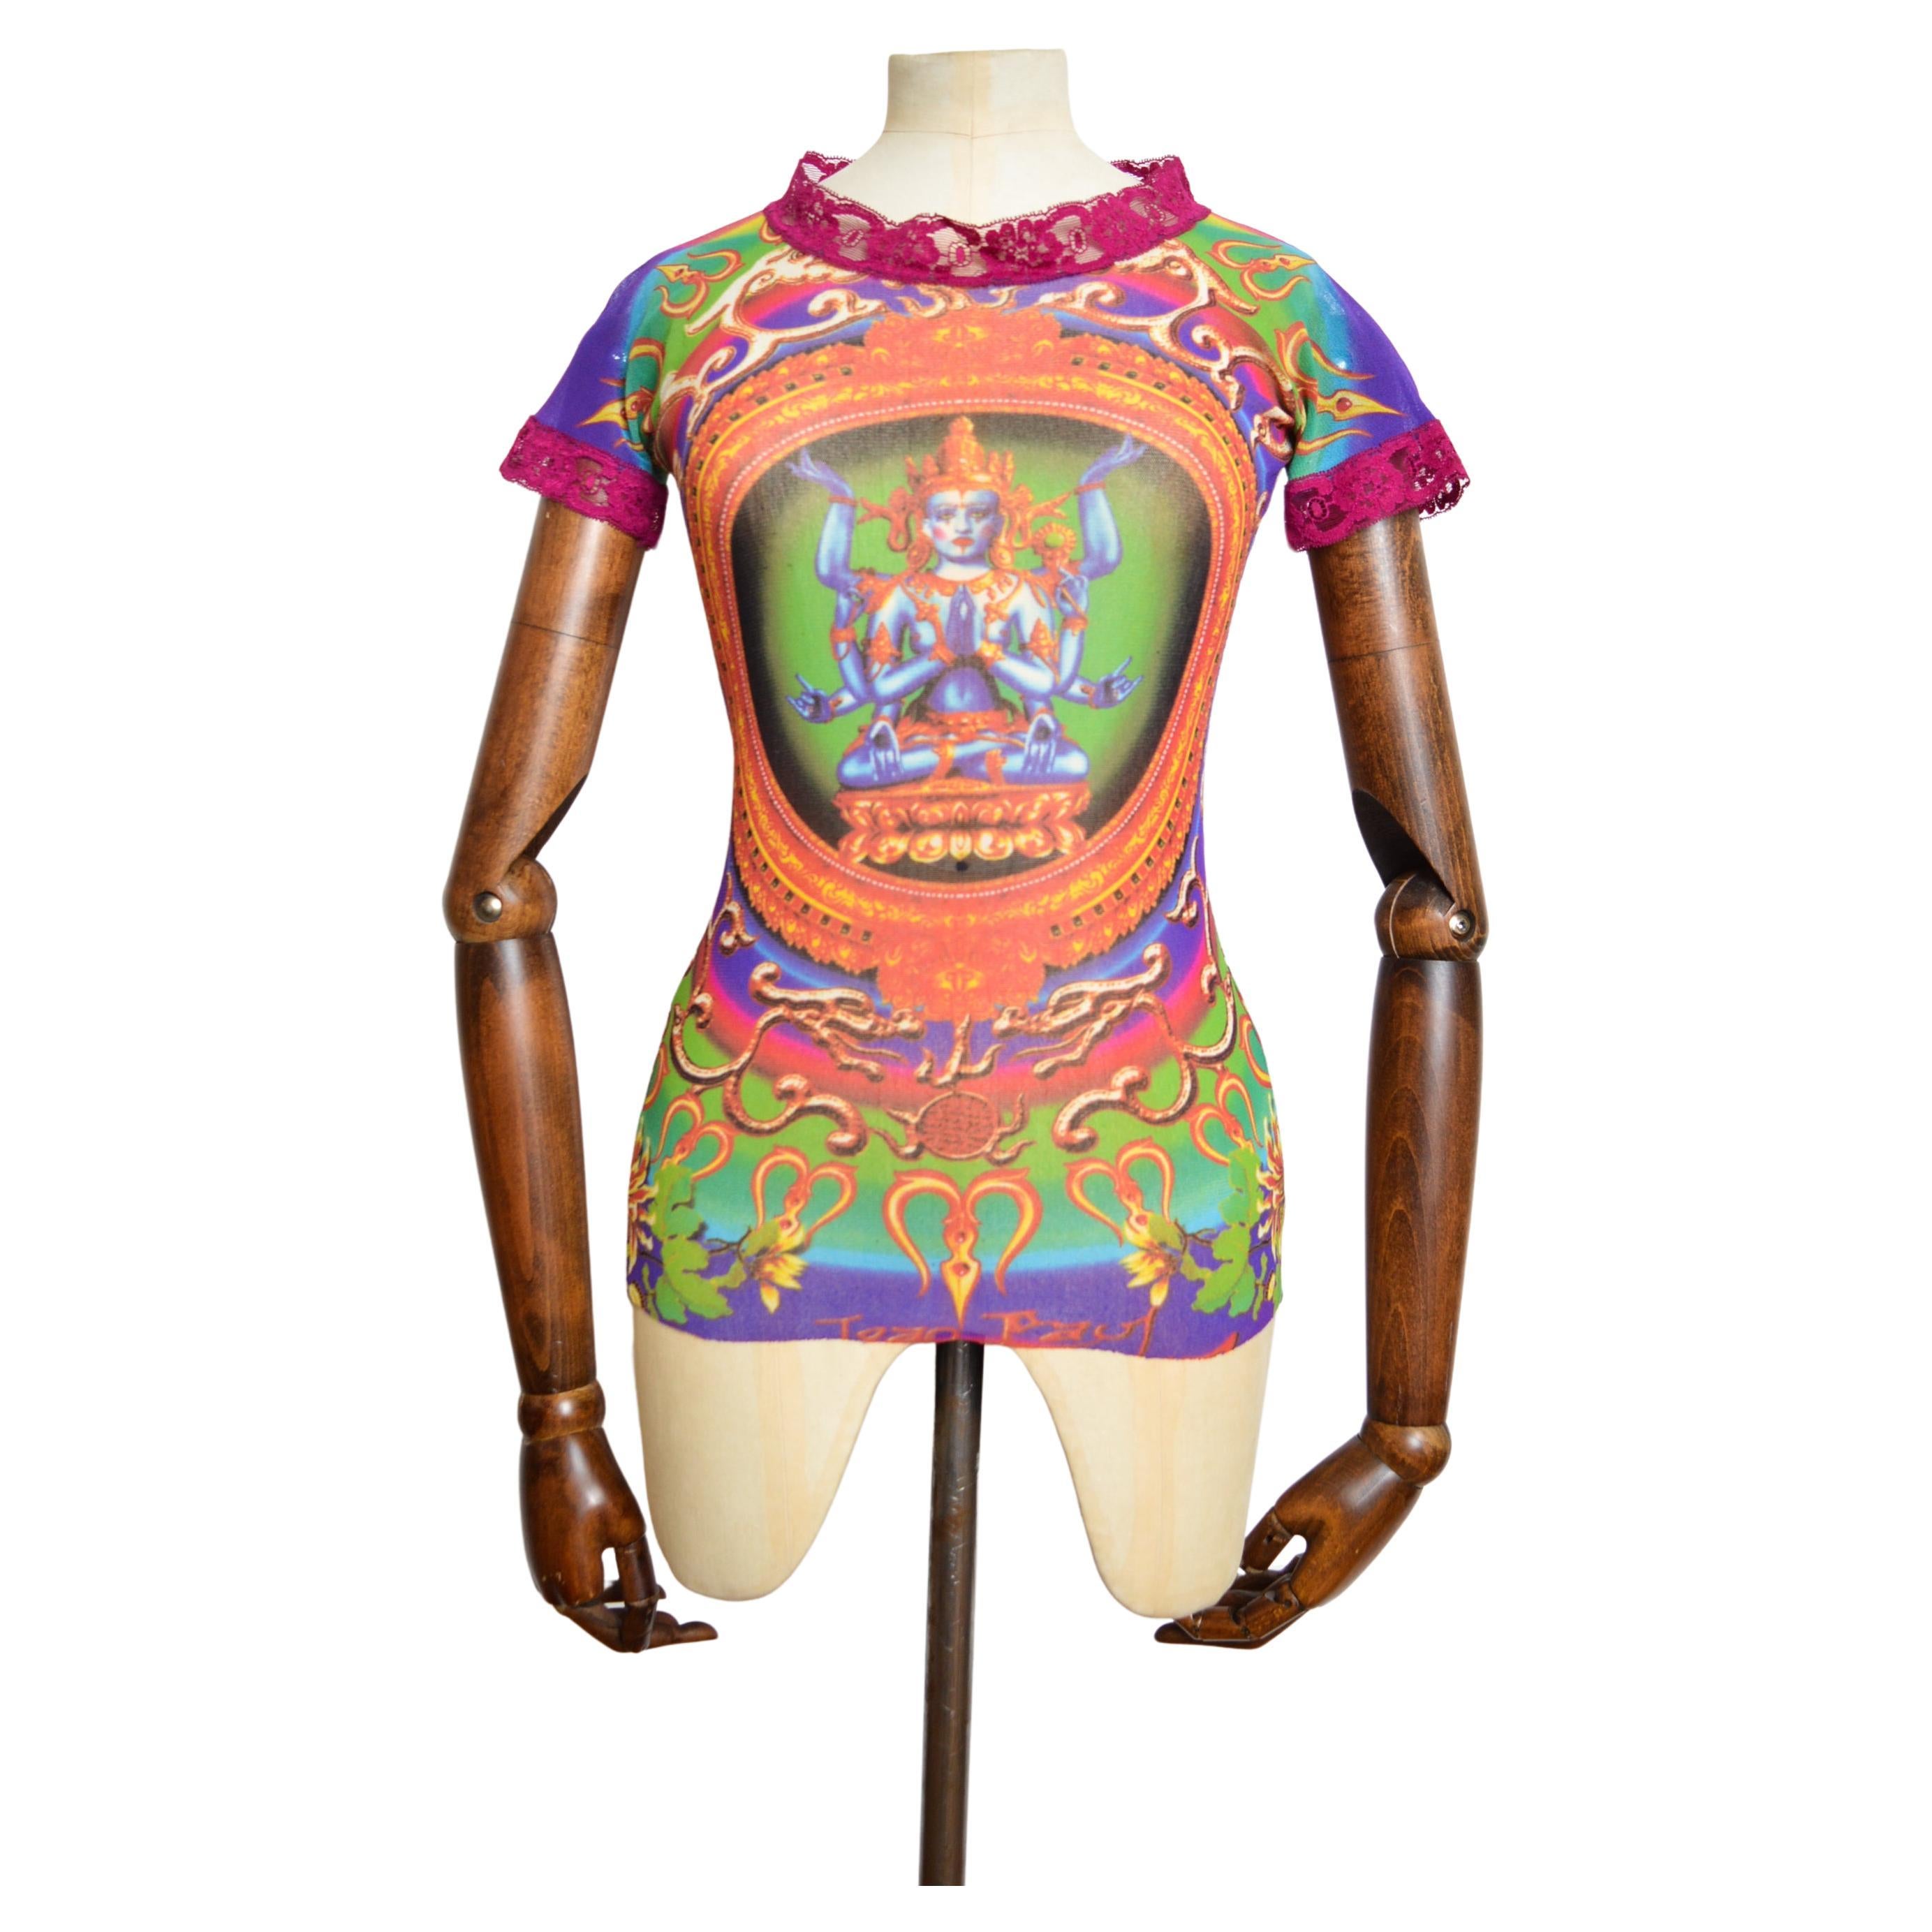 1993 Jean Paul Gaultier Blue Goddess Hindu Diety Colourful Mesh Top - Baby Tee For Sale